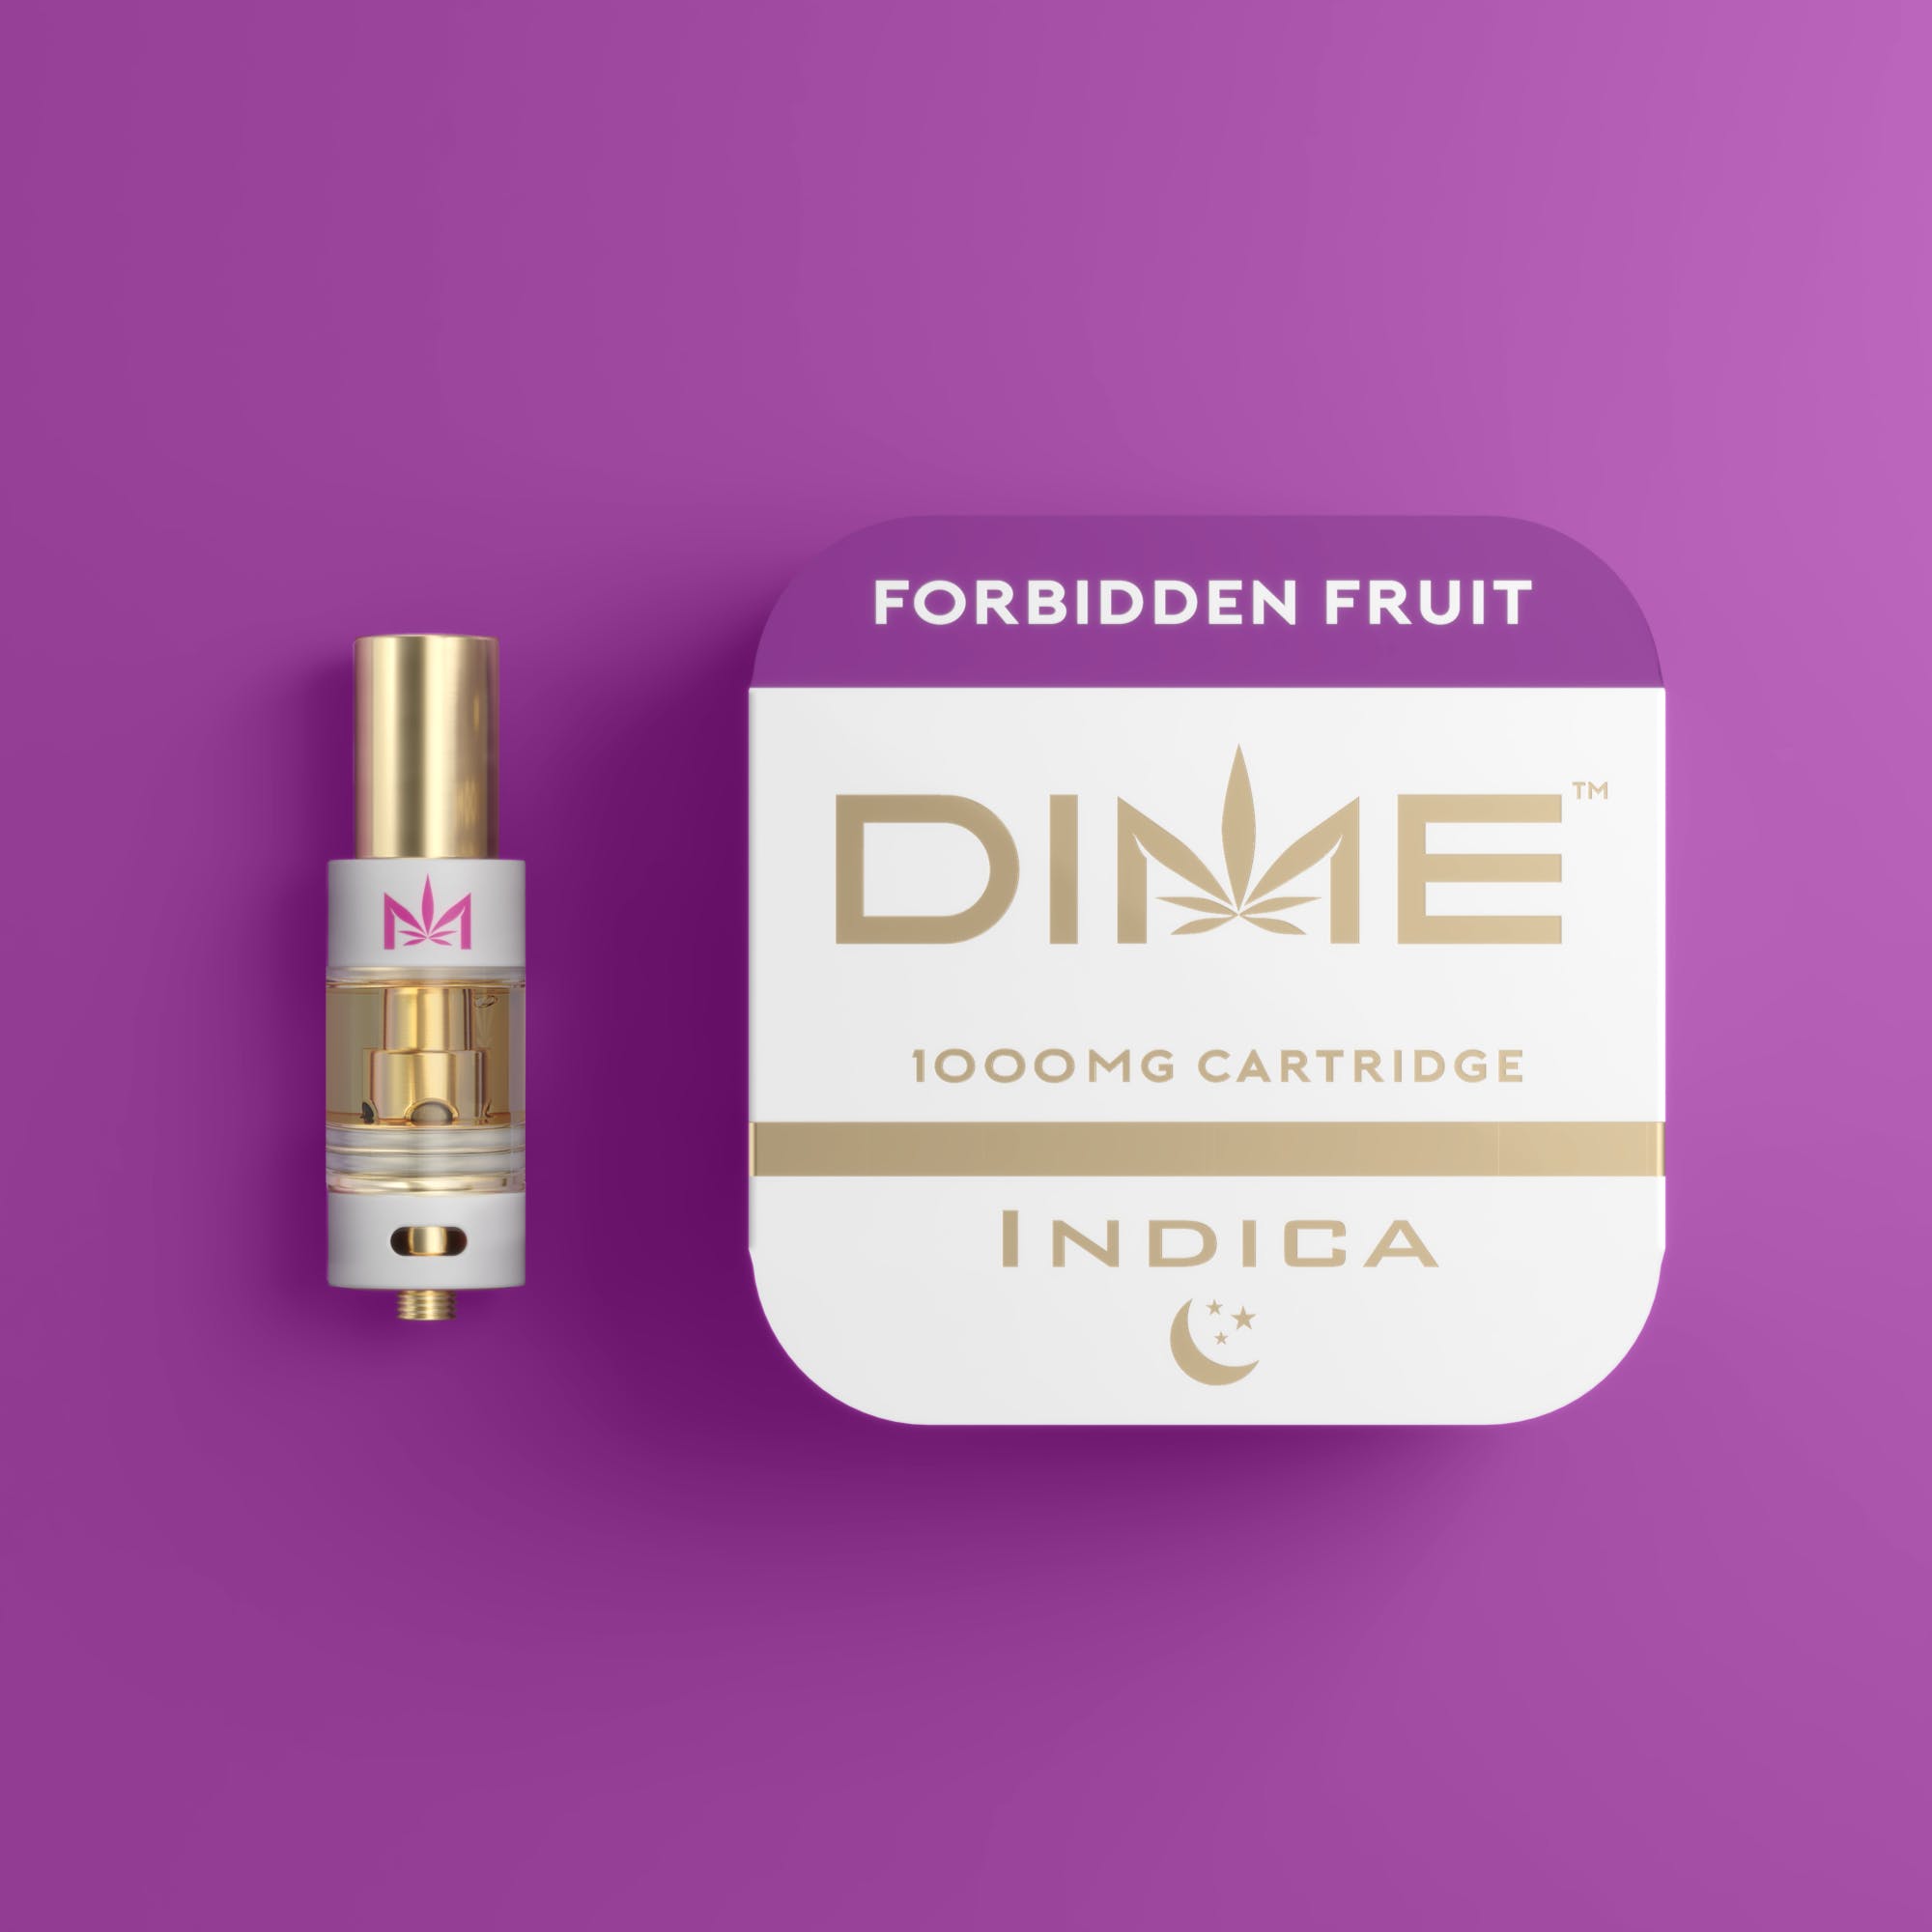 concentrate-dime-industries-dime-1000mg-cartridge-forbidden-fruit